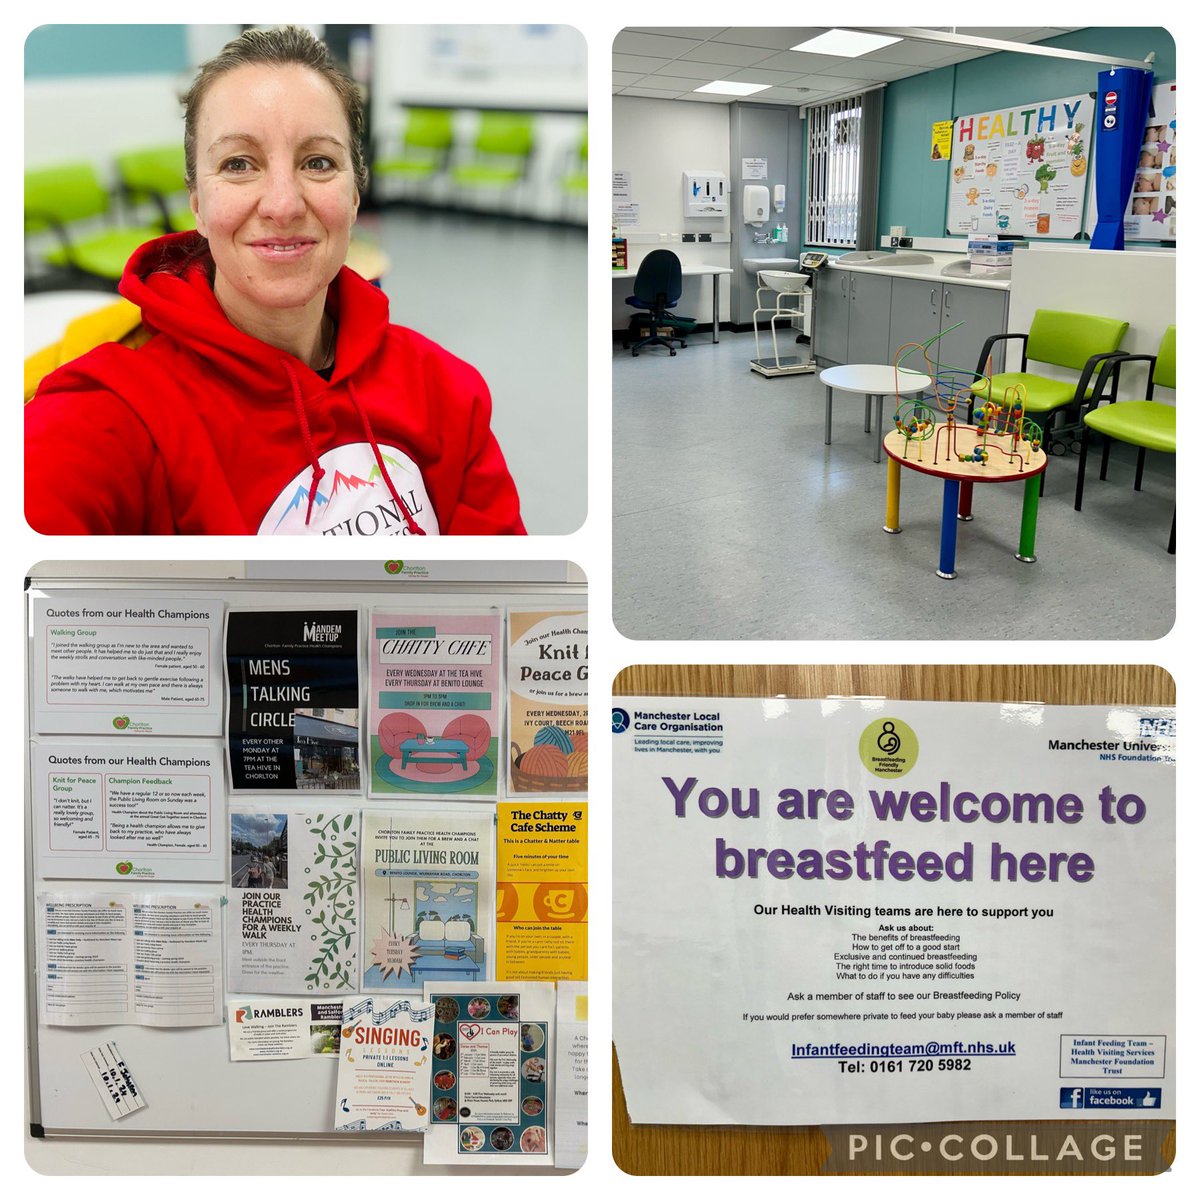 Today is my last Councillor Advice Surgery before stepping down. Thanks to our local GP surgery @ChorltonFPGP for hosting me. It’s great to see the notice board packed with info about local community activities like singing, walking groups, play, knitting, chatty cafes, public